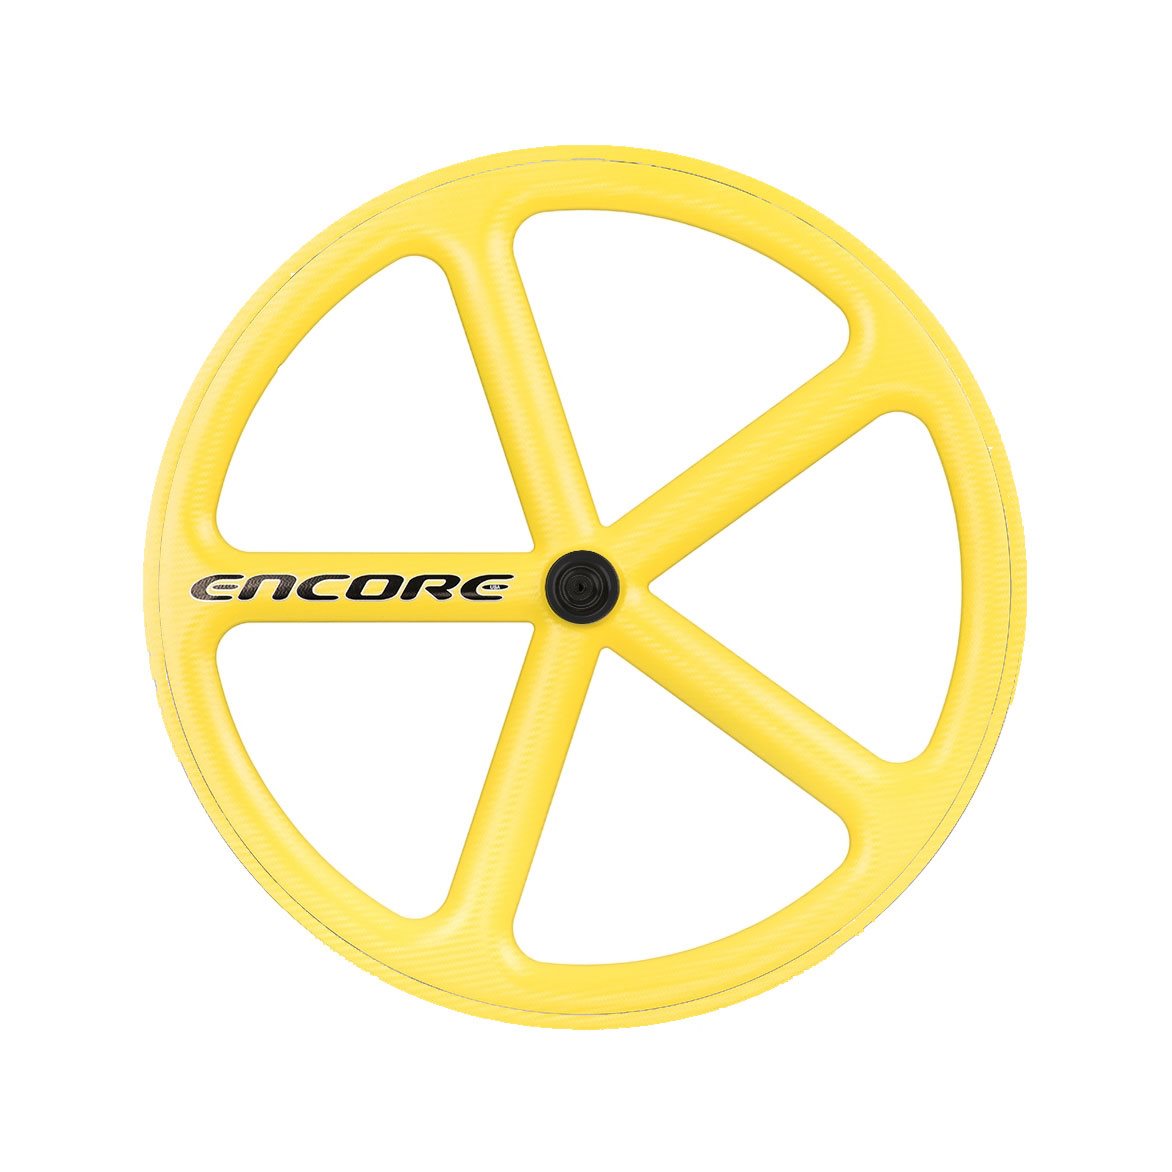 rear wheel 700c track 5 spokes carbon weave yellow nmsw